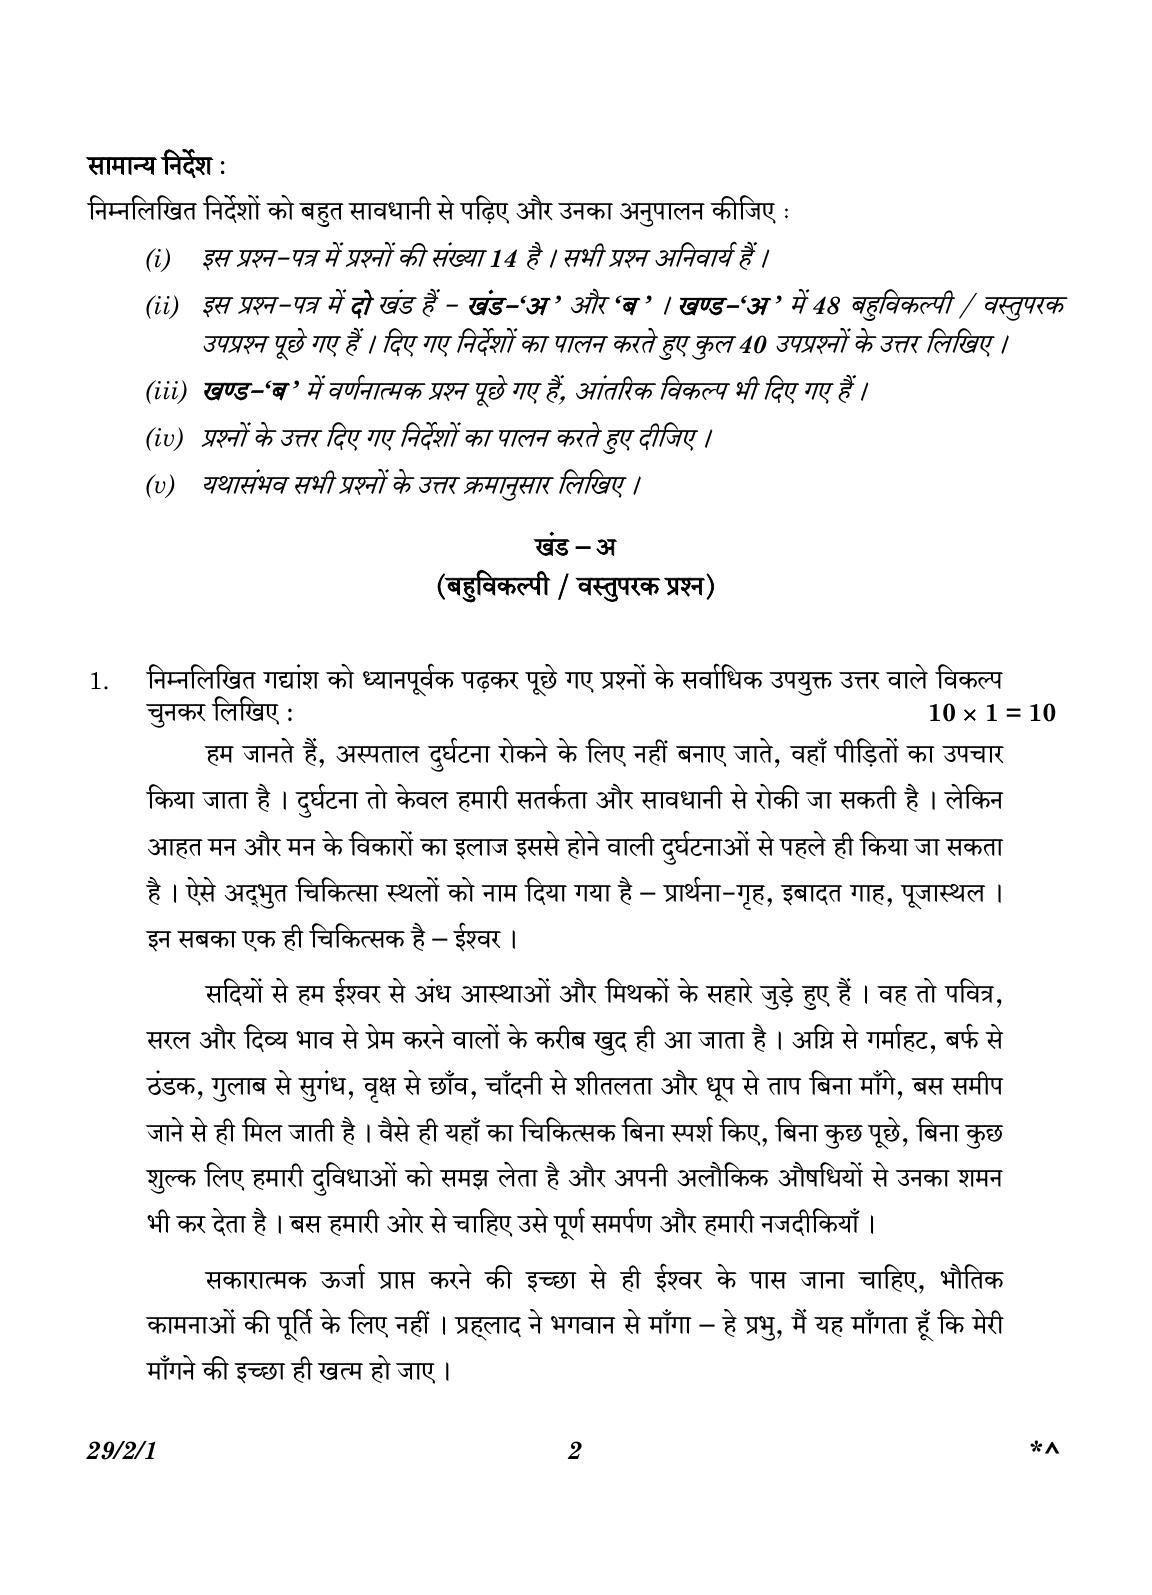 CBSE Class 12 29-2-1 Hindi Elective 2023 Question Paper - Page 2